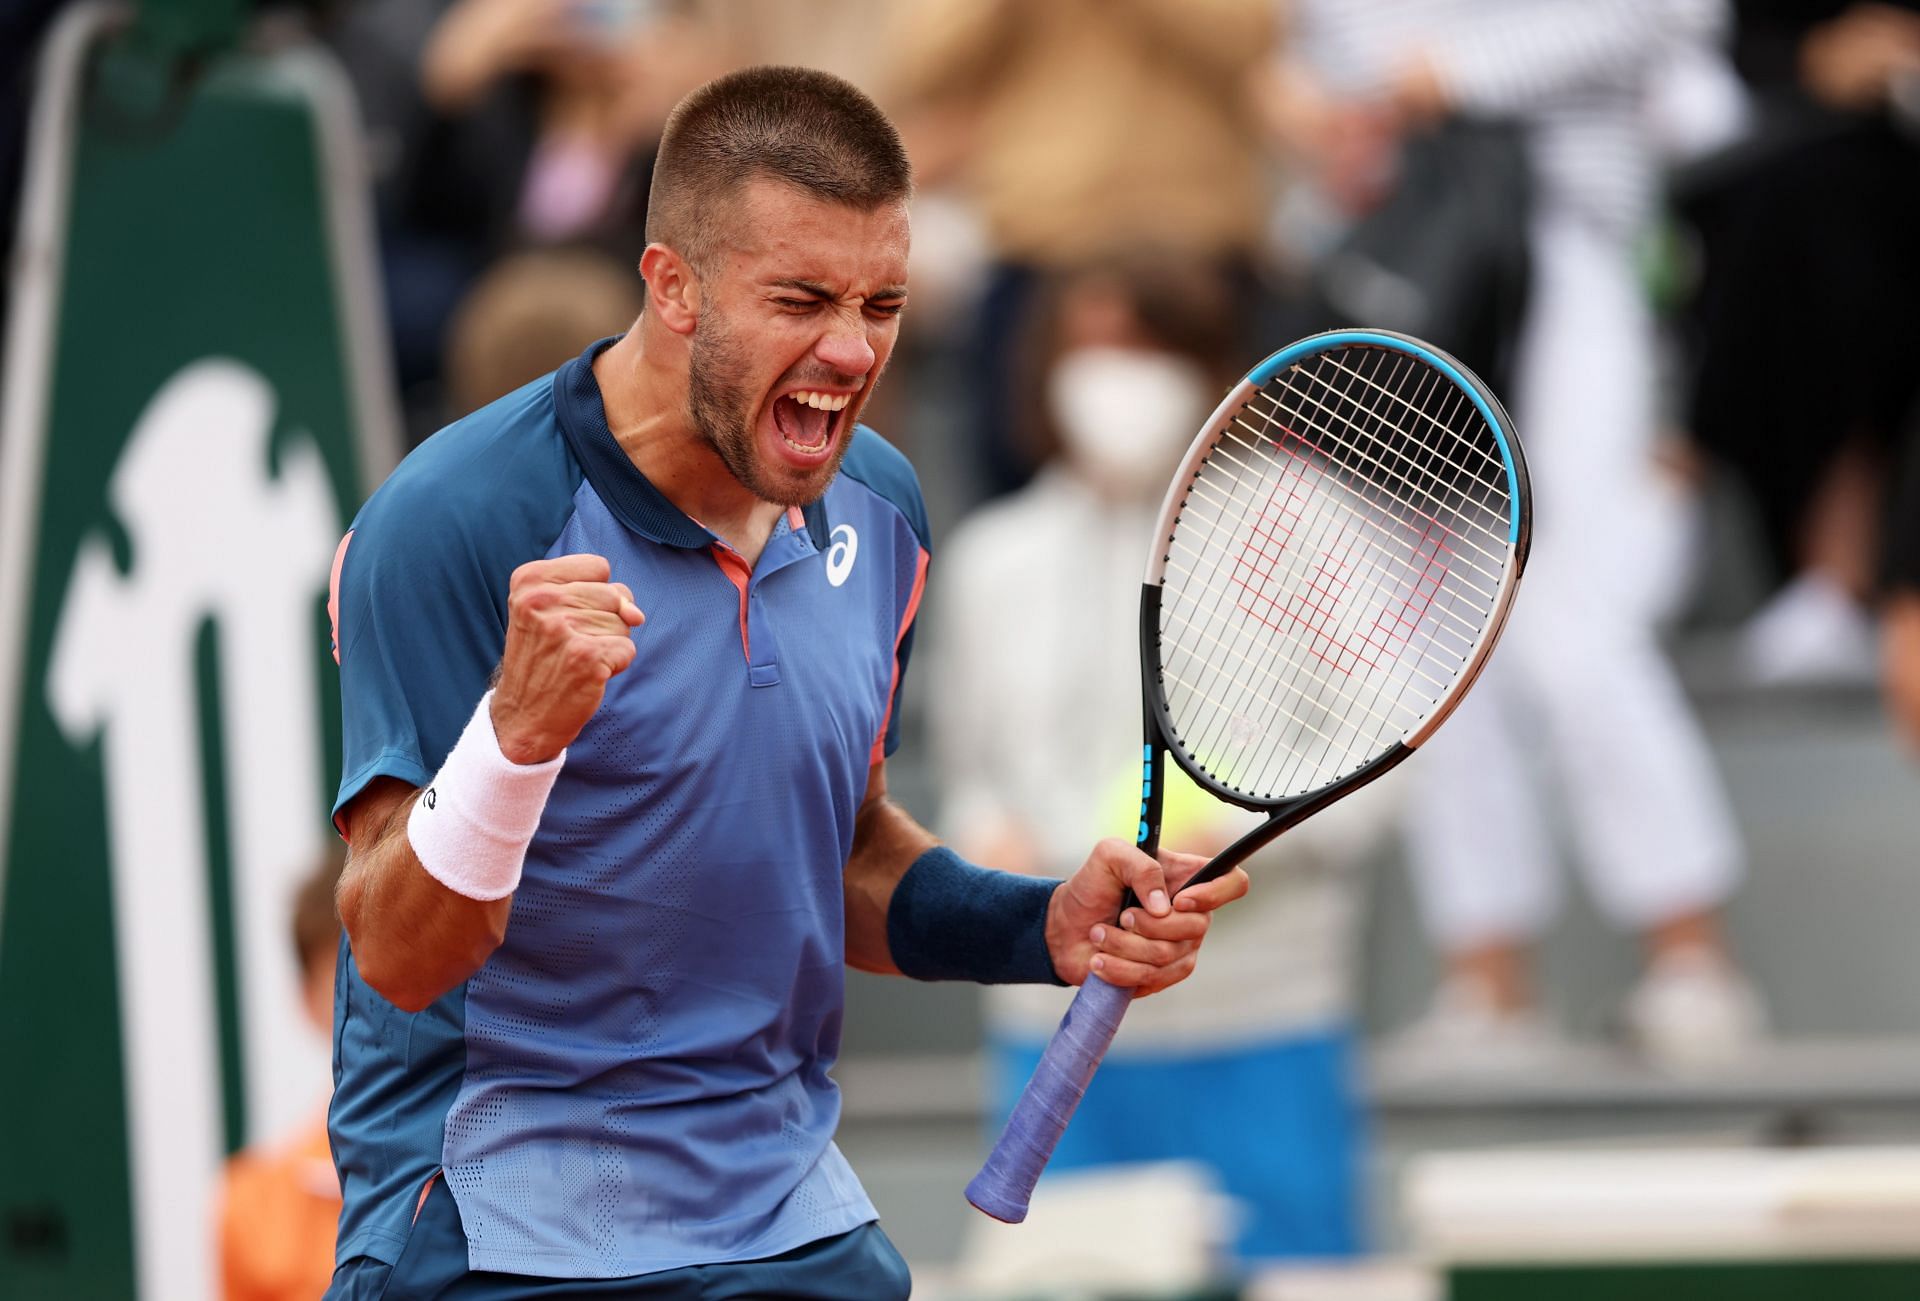 Griekspoor will have his hands full if Borna Coric can hit his rhythm early on